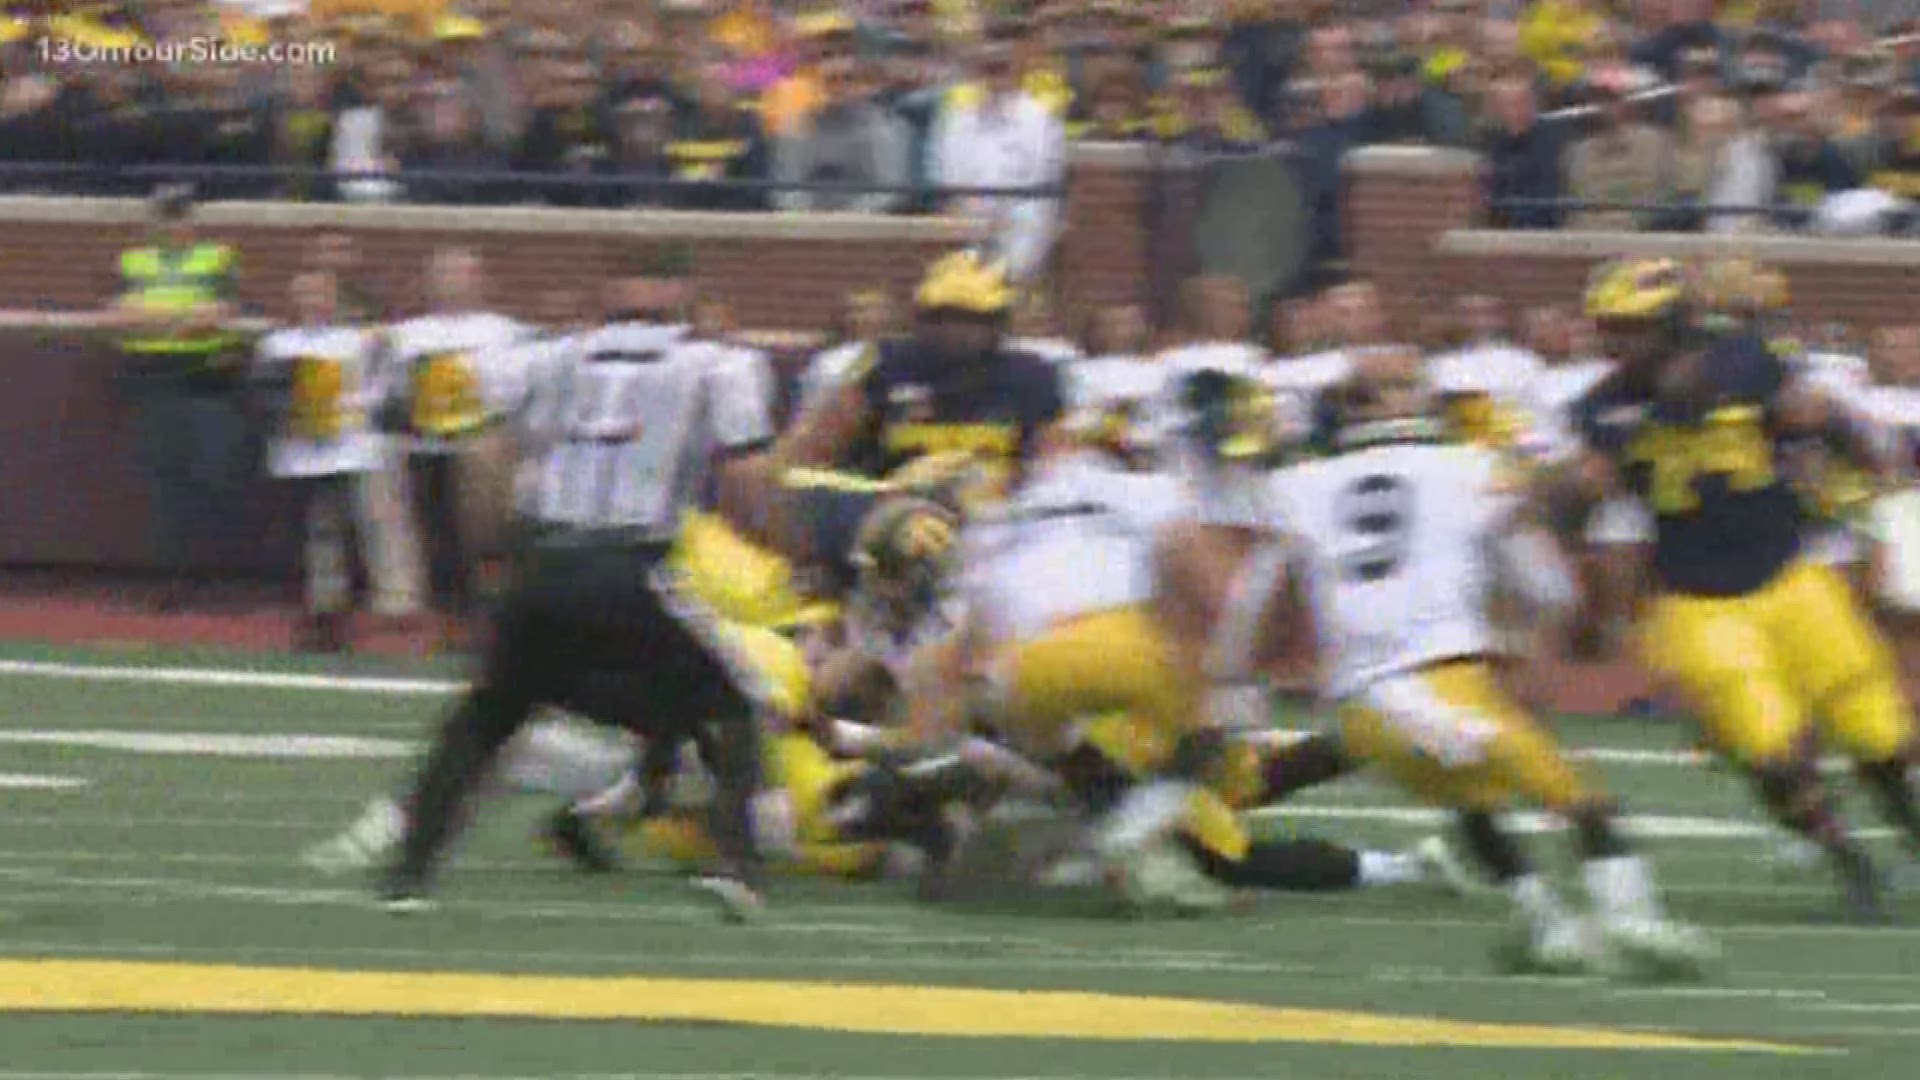 Michigan Coach Jim Harbaugh said its offense was starting to hit its stride.